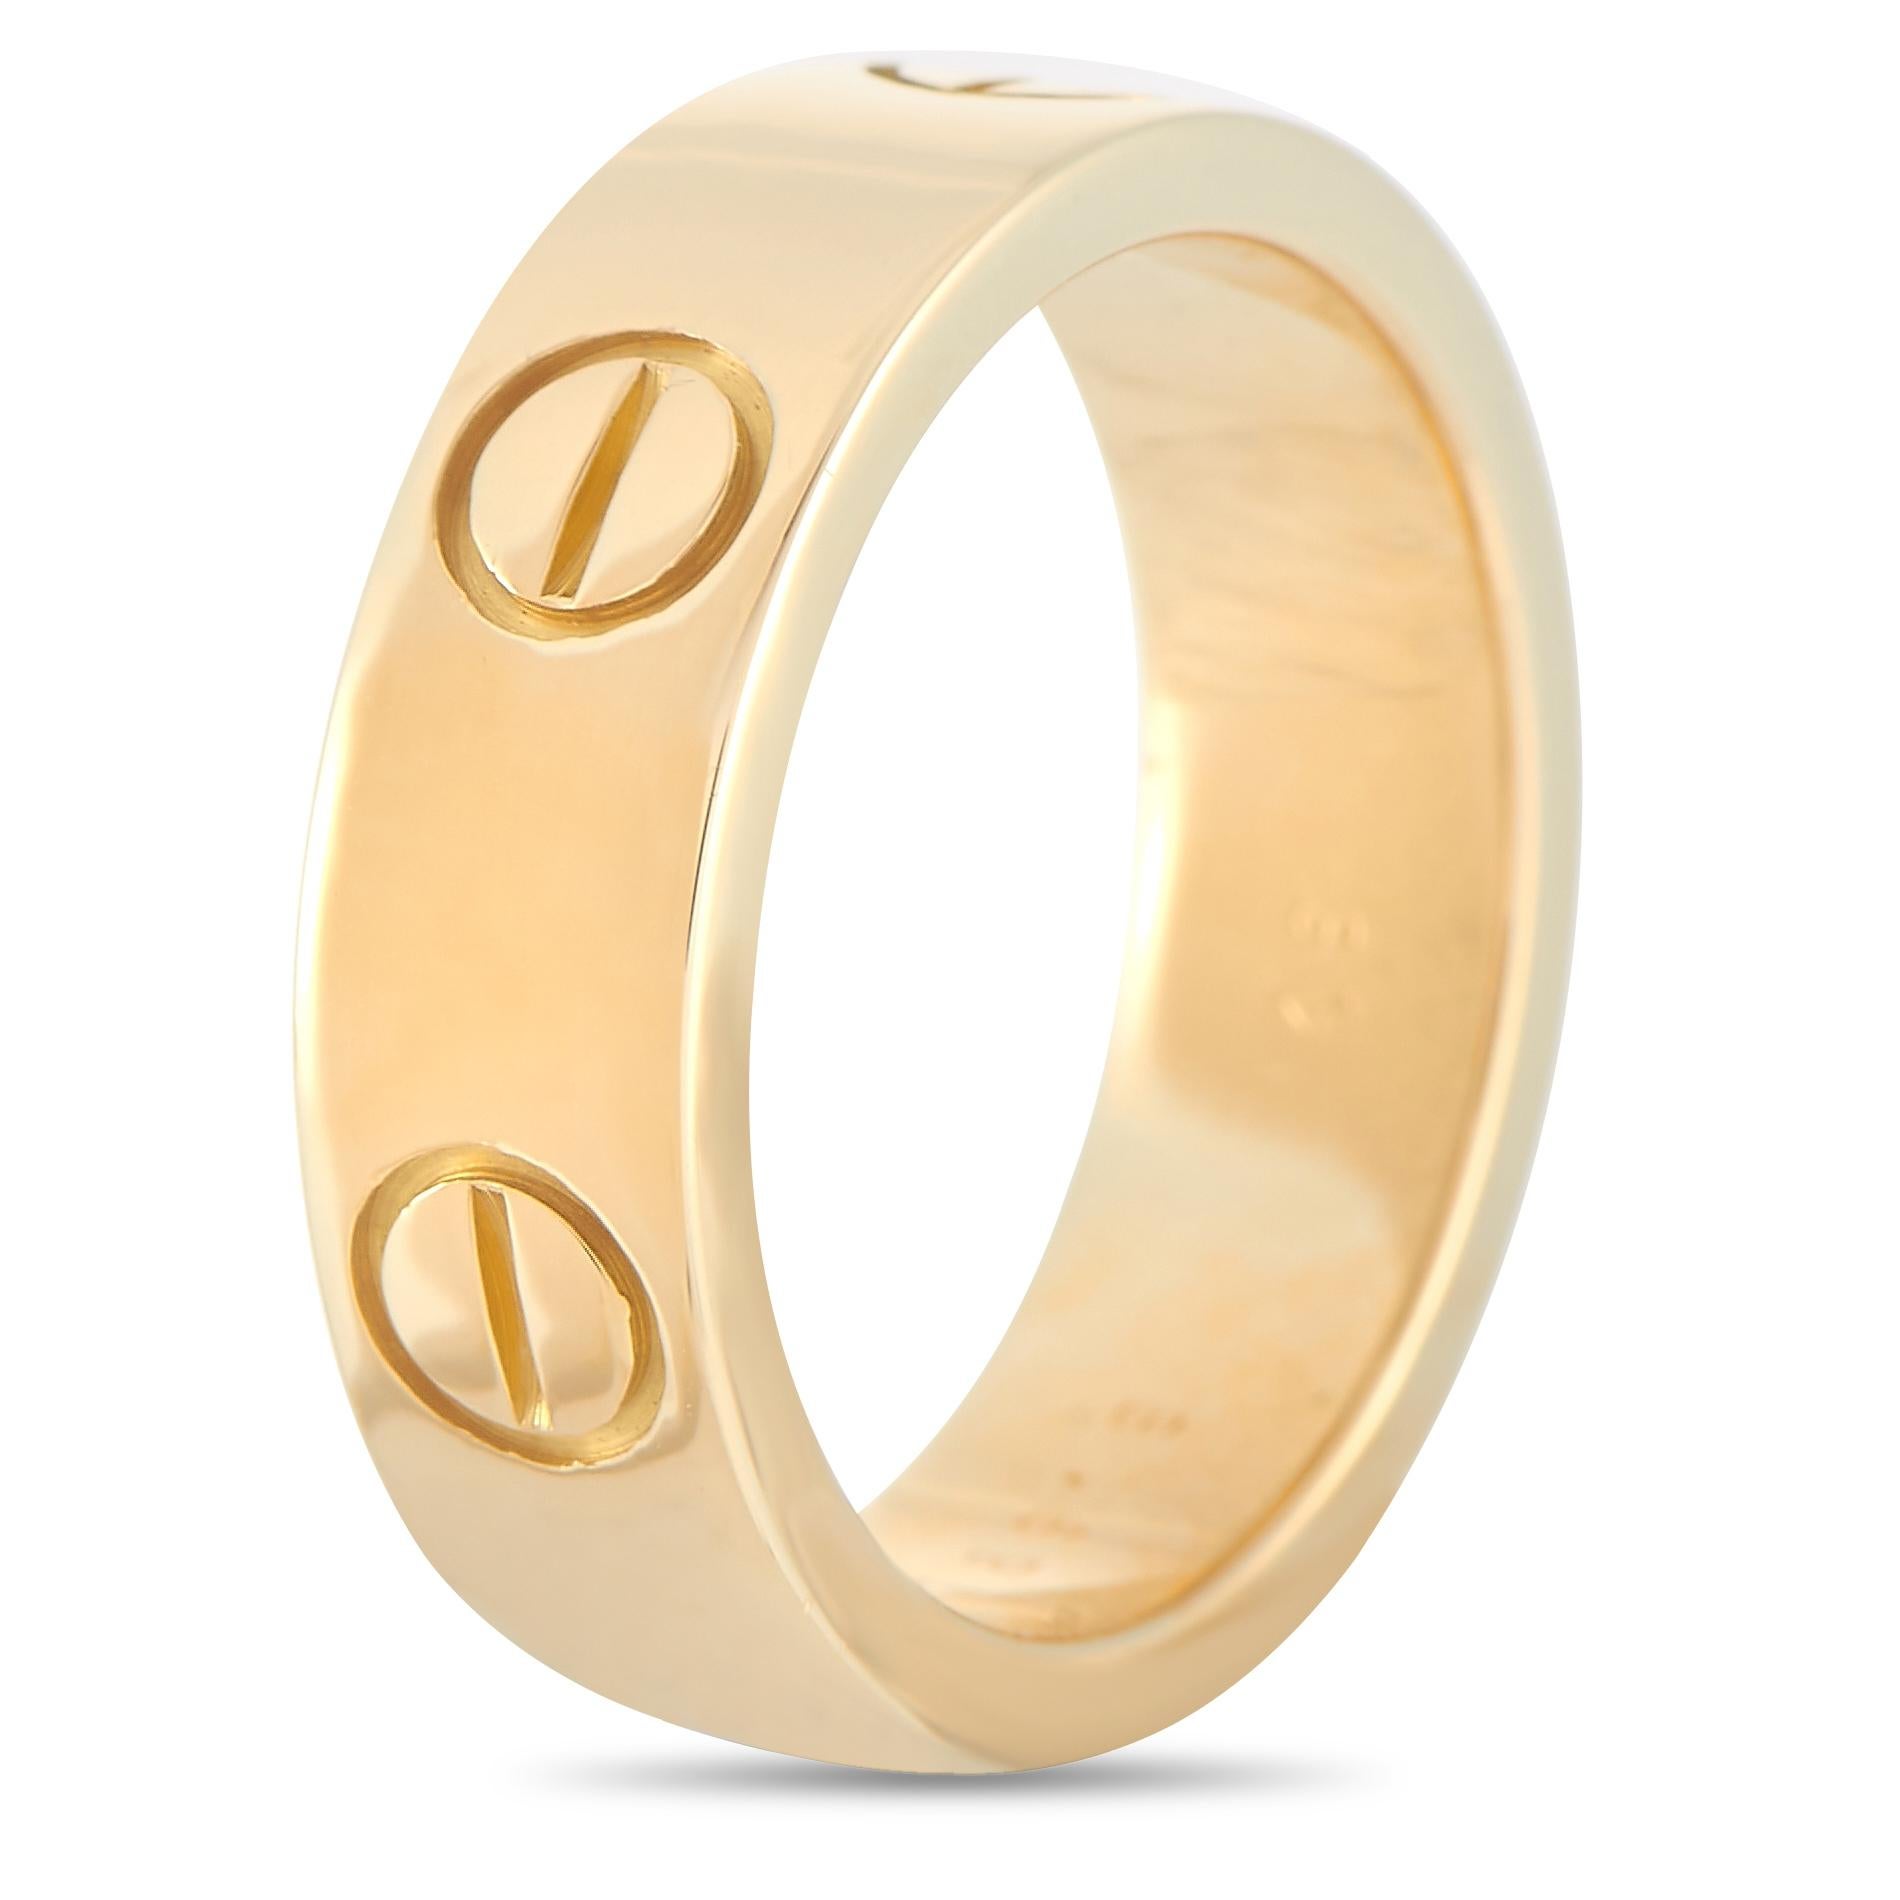 Crafted from 18K Yellow Gold, this gorgeous band ring from Cartier's 